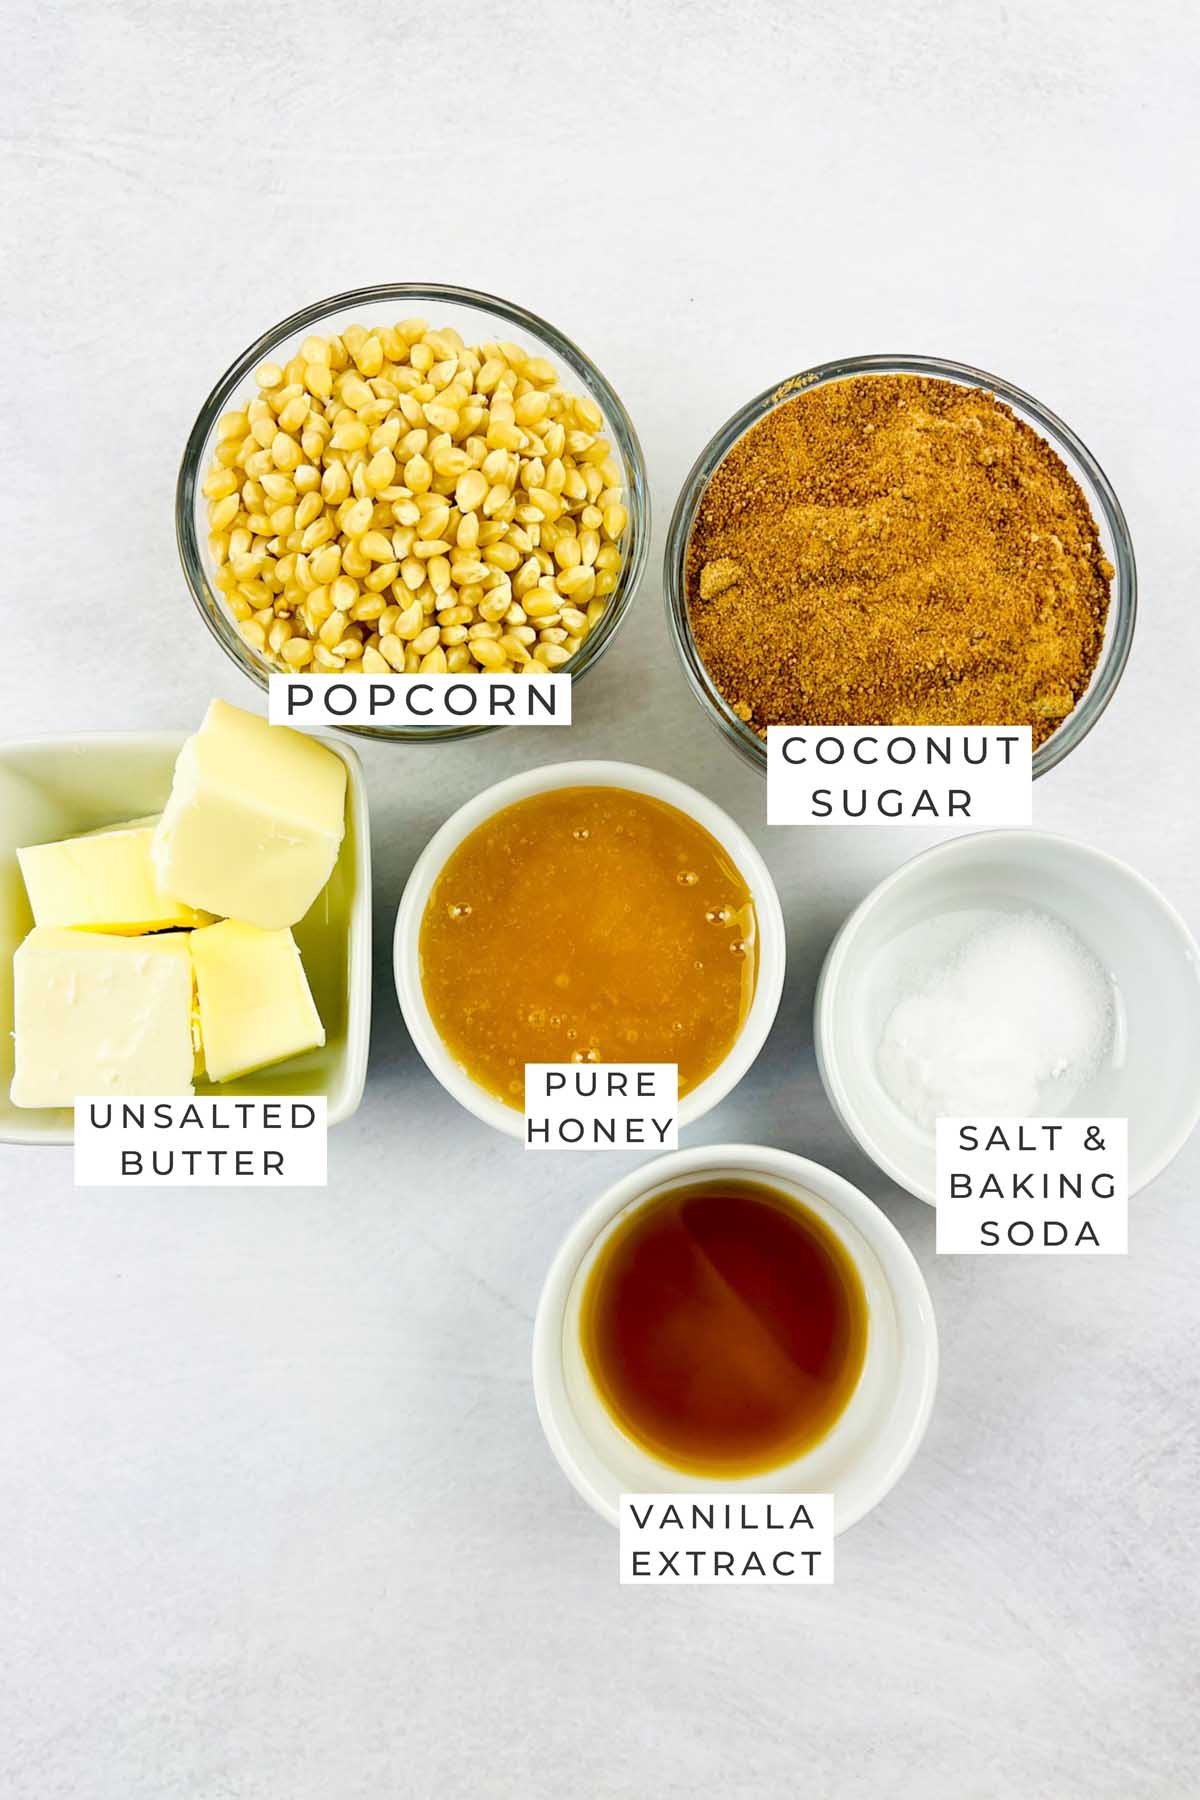 Labeled ingredients for the caramel popcorn.